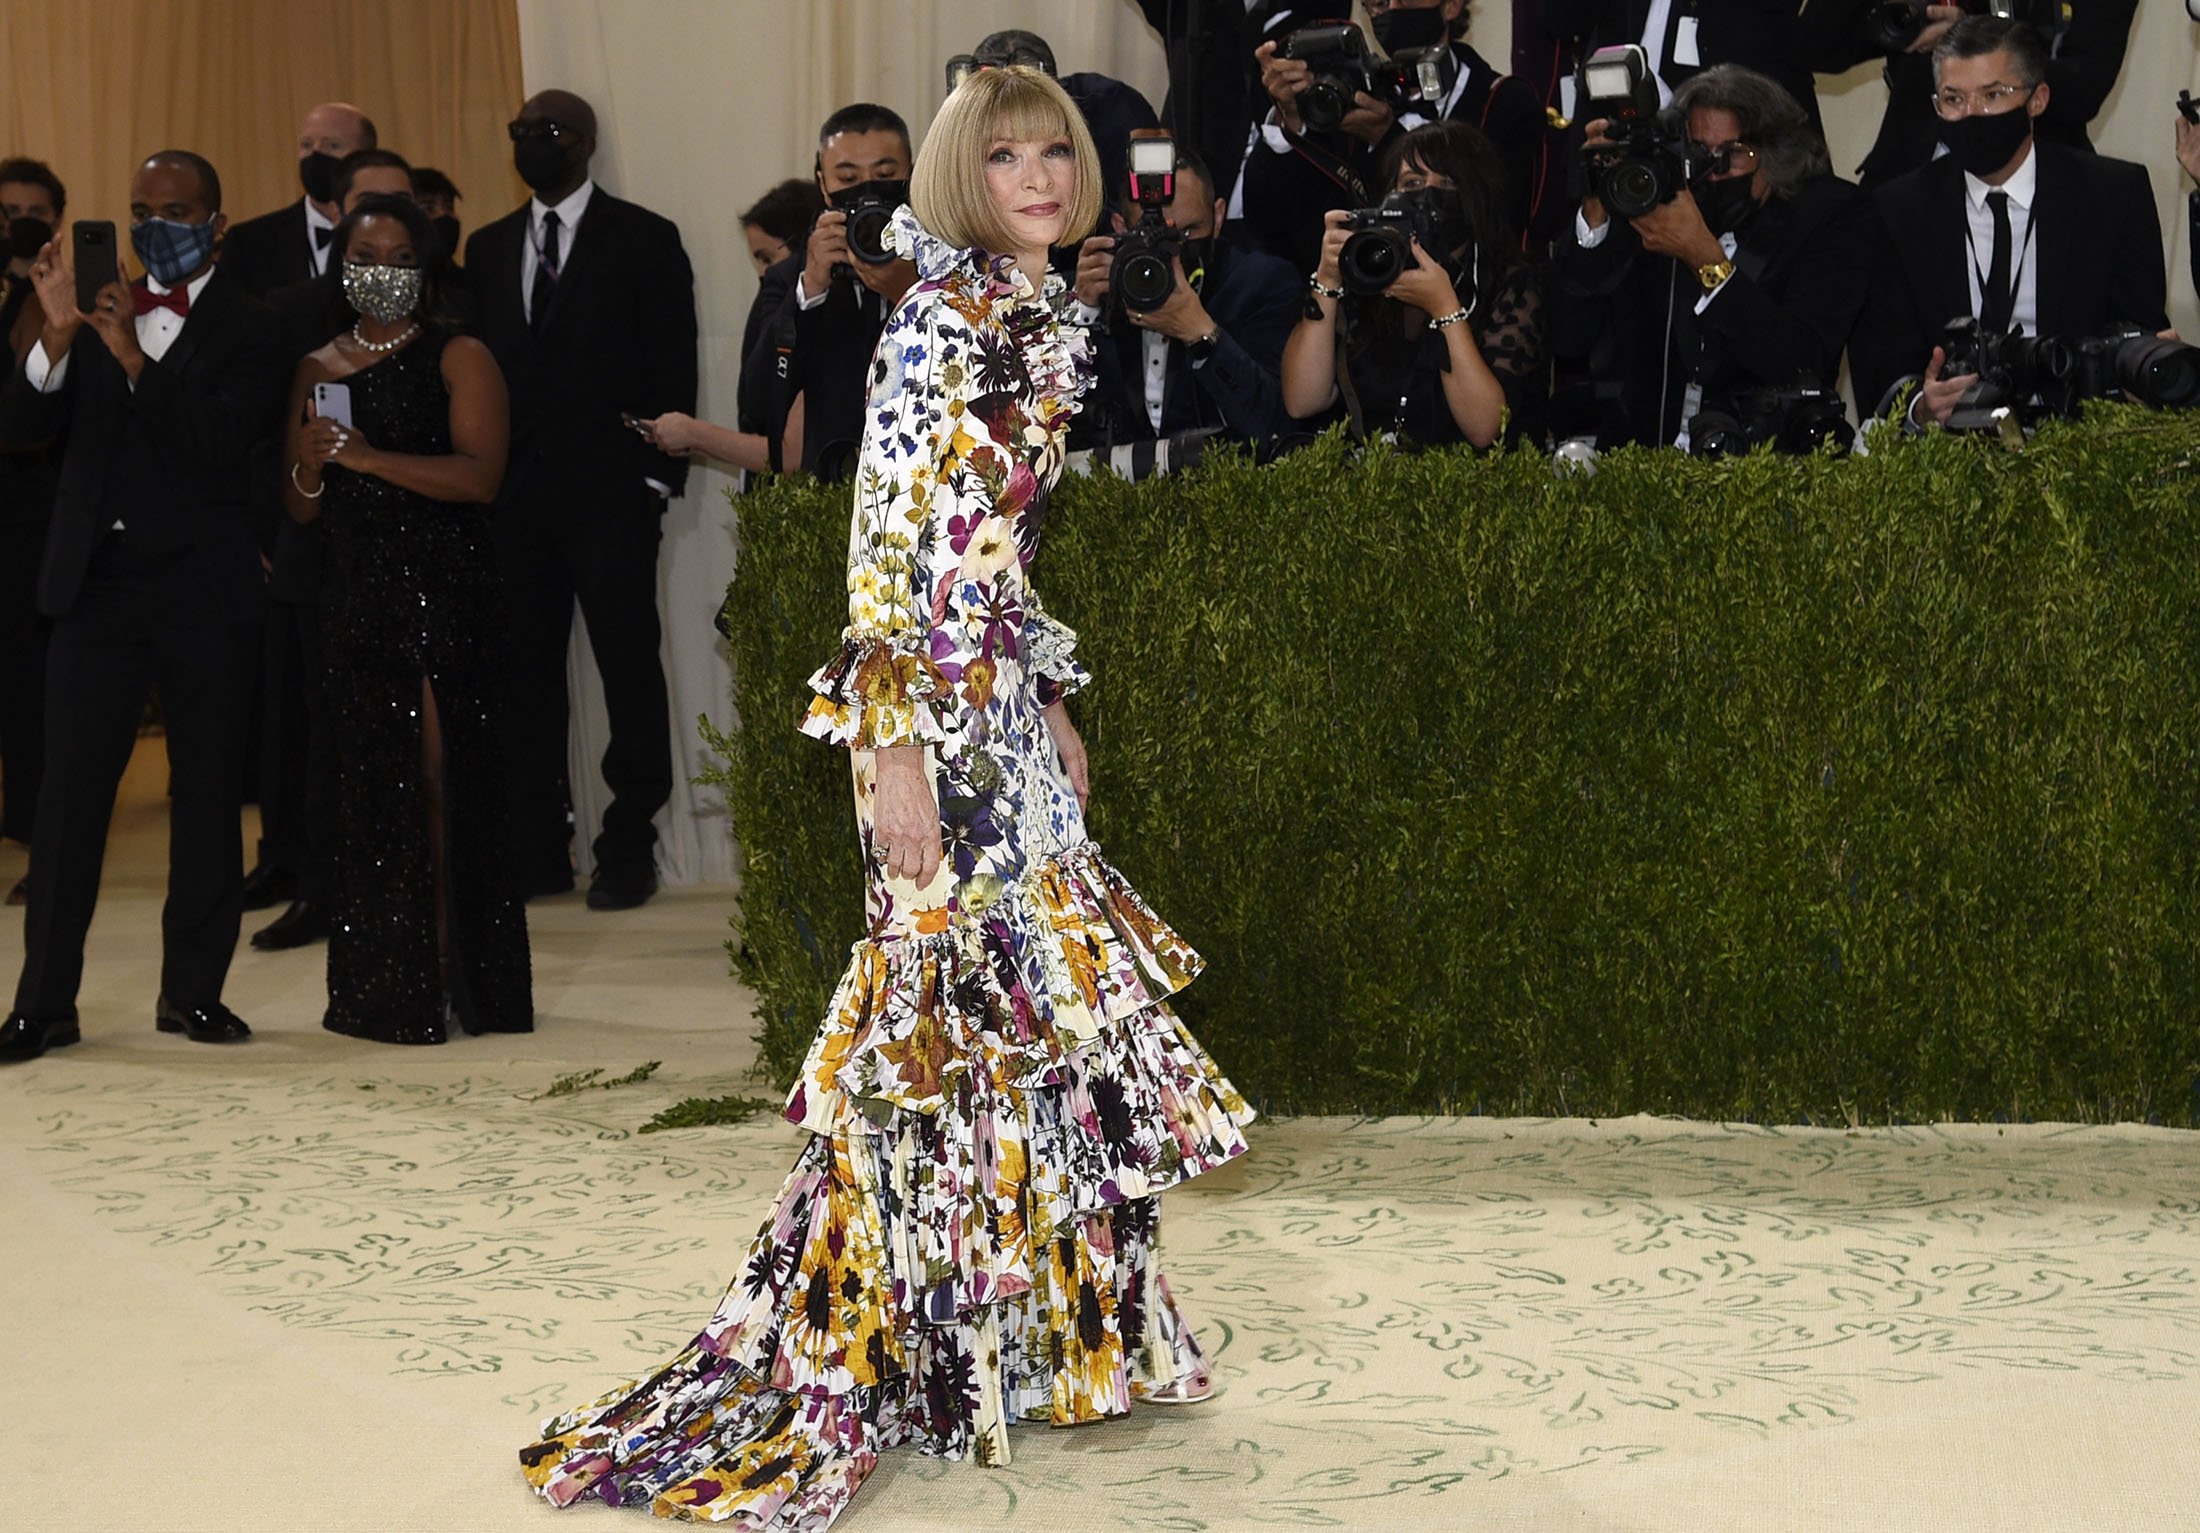 Anna Wintour arrives for the 2021 Met Gala at the Metropolitan Museum of Art, in New York, U.S., Sept. 13, 2021. (AP Photo)